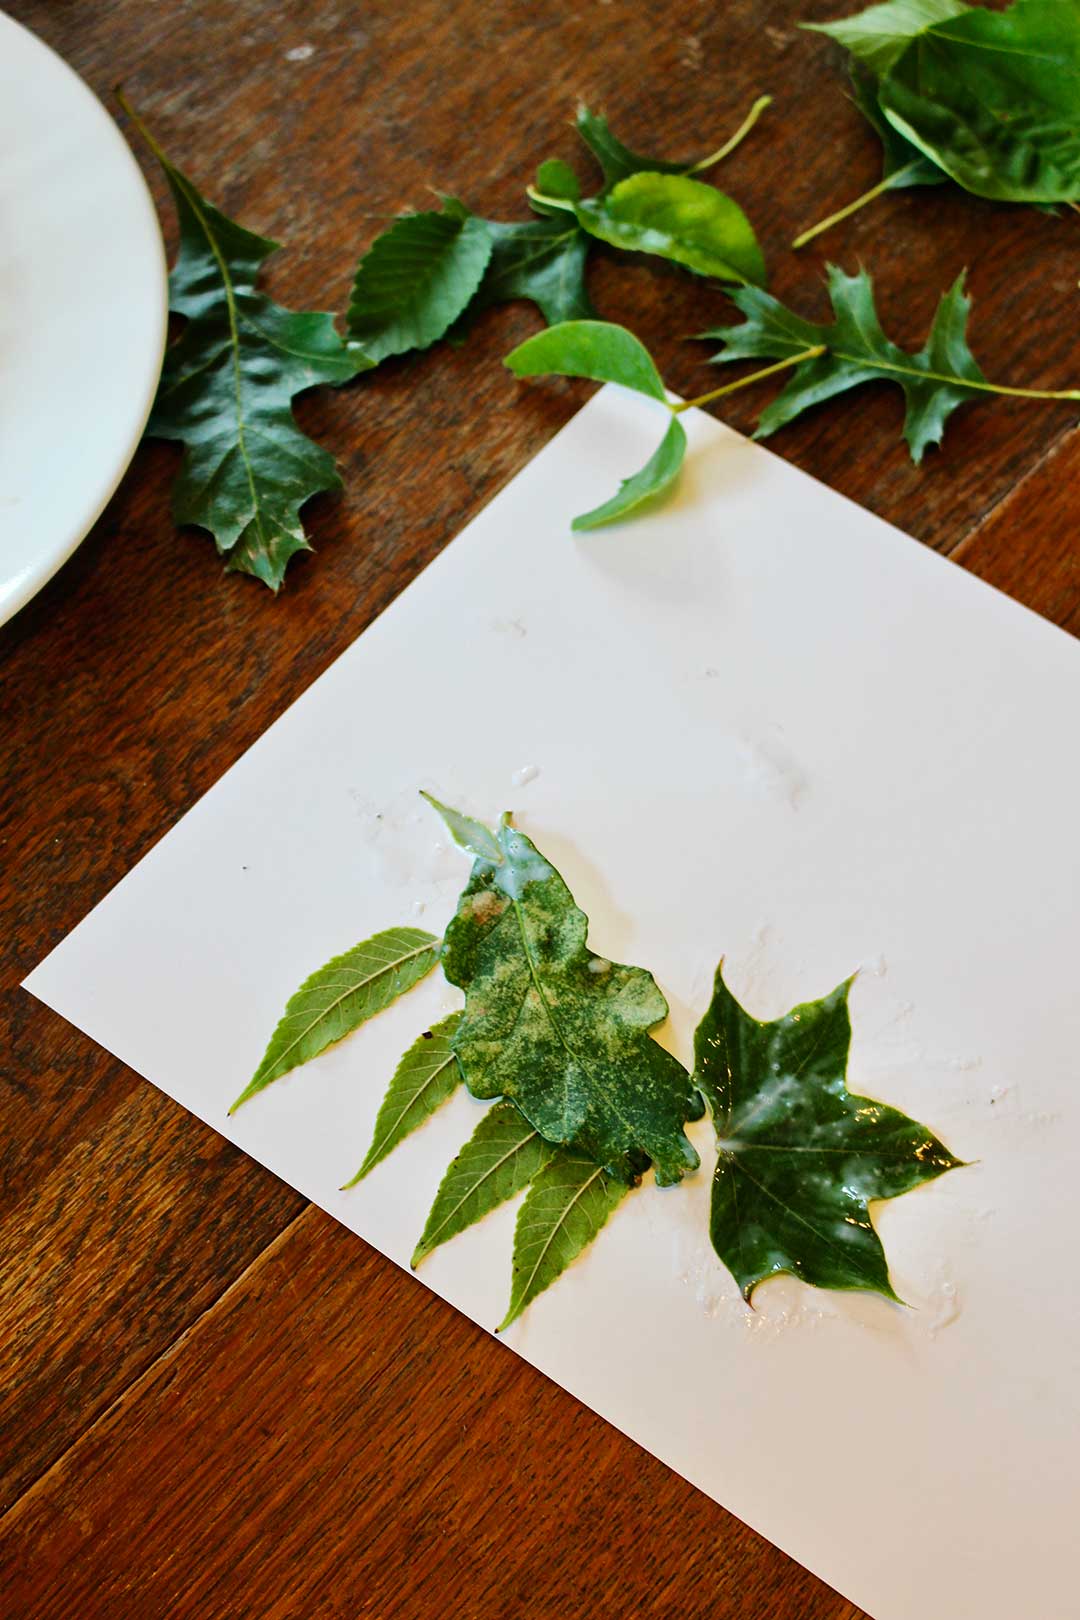 Leaf collage on white paper on wooden table next to green leaves of various shapes.